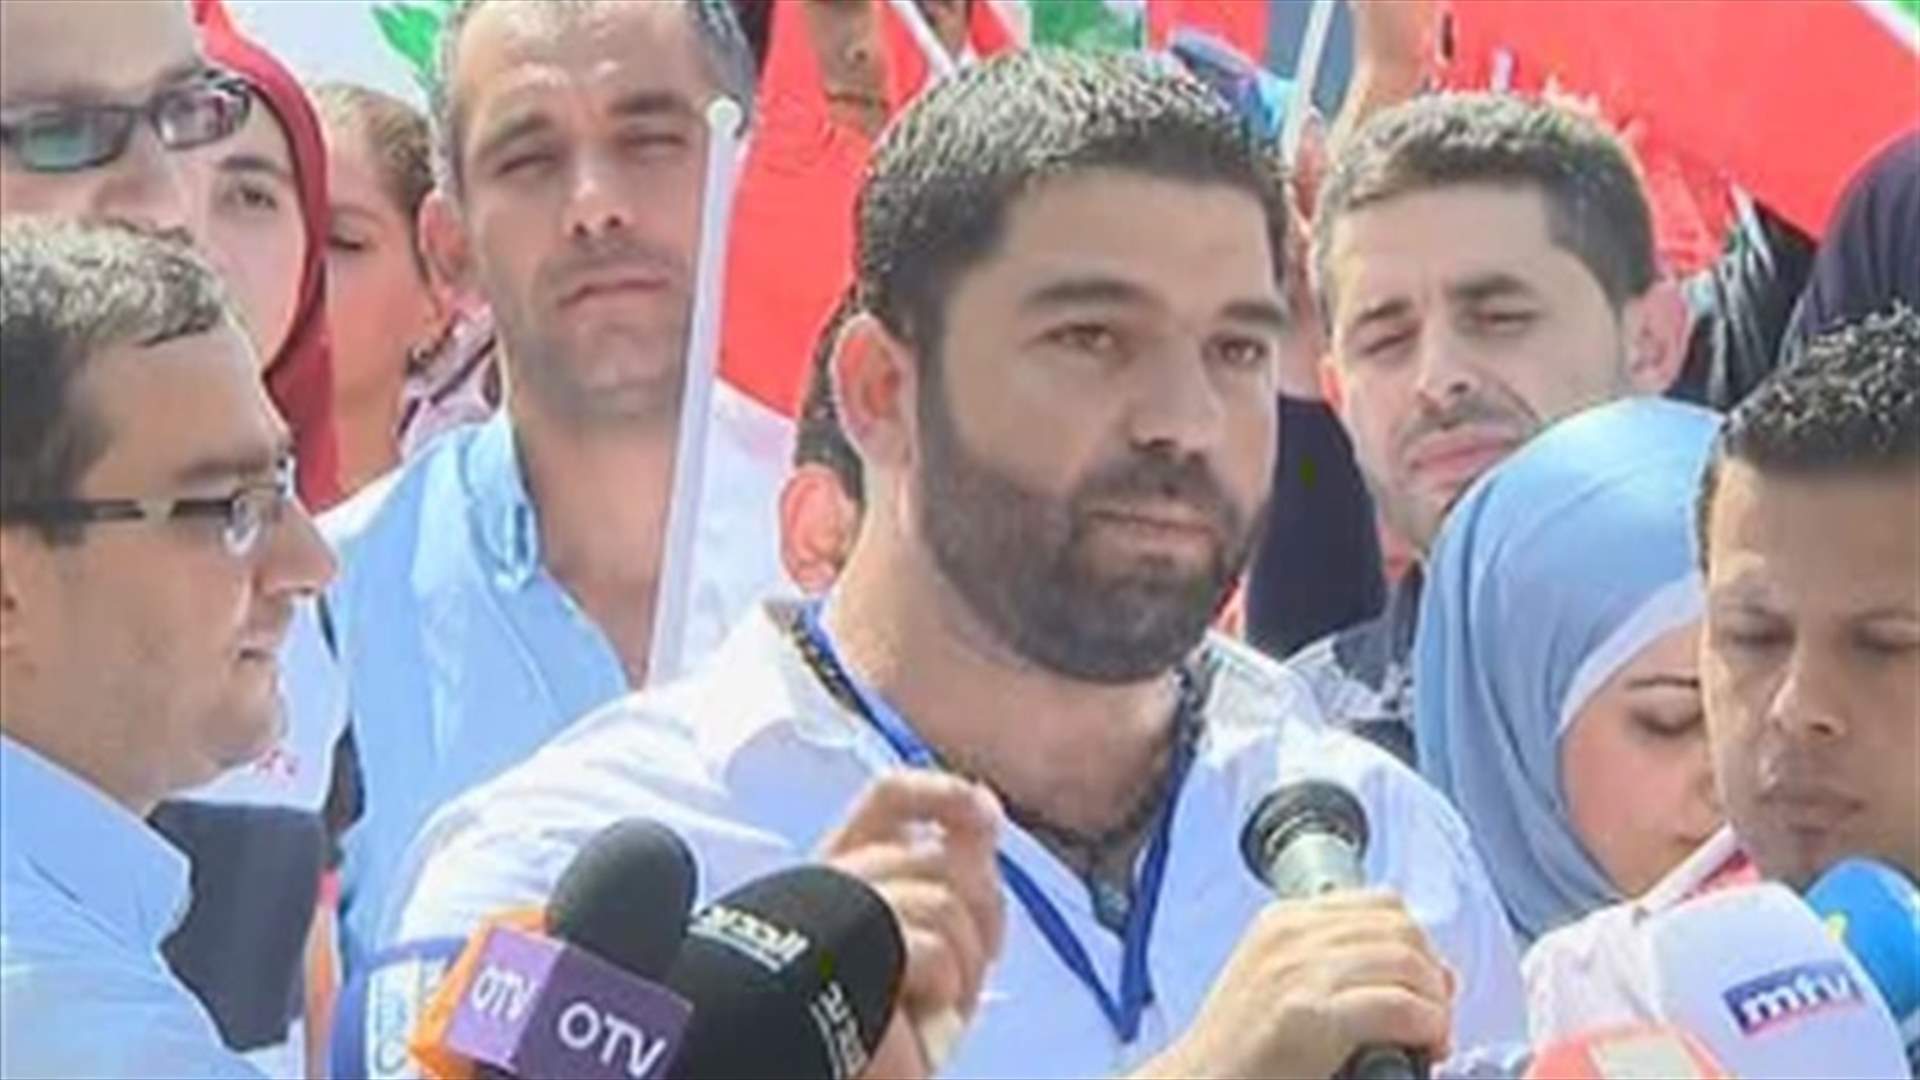 Teachers hold protest at Beirut’s Riad al-Solh Square